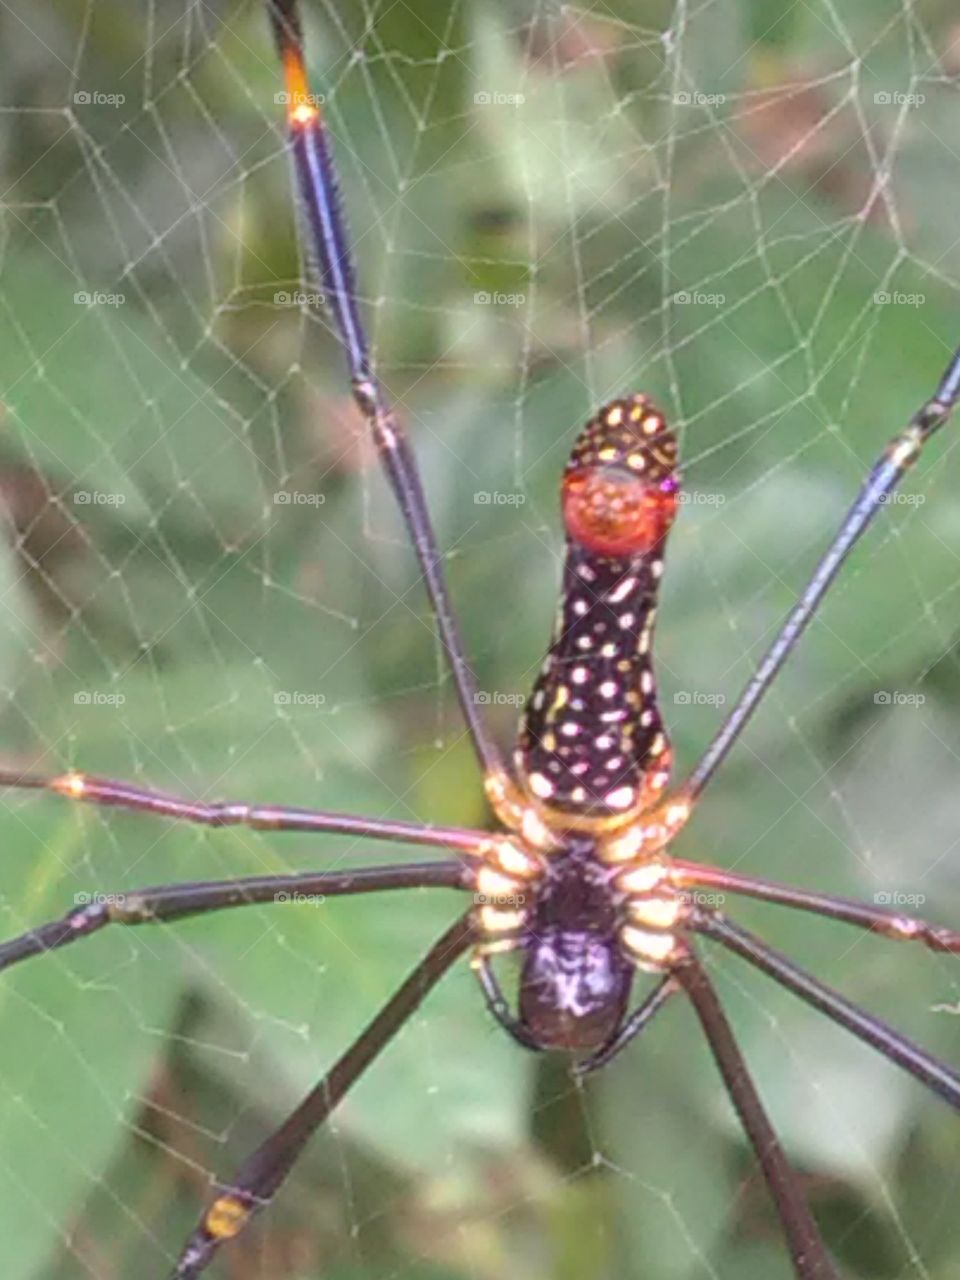 Tigger spider very beautiful and very dangerous insect. (nature beauty)